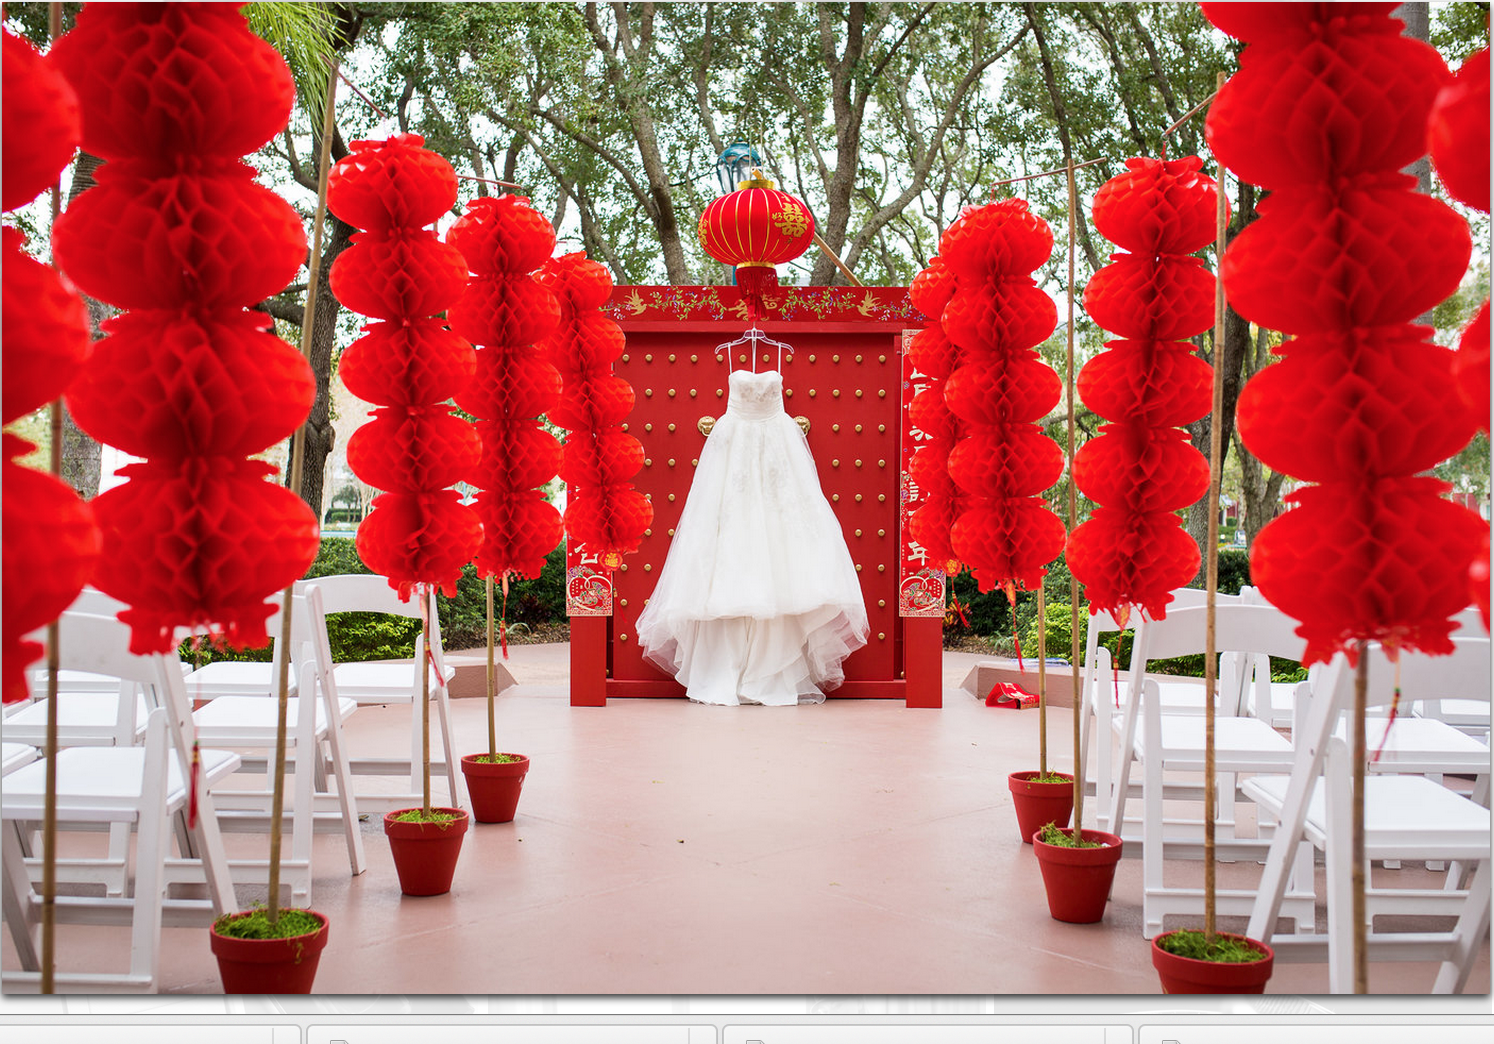 Chinese Wedding Wallpapers High Quality | Download Free1494 x 1044